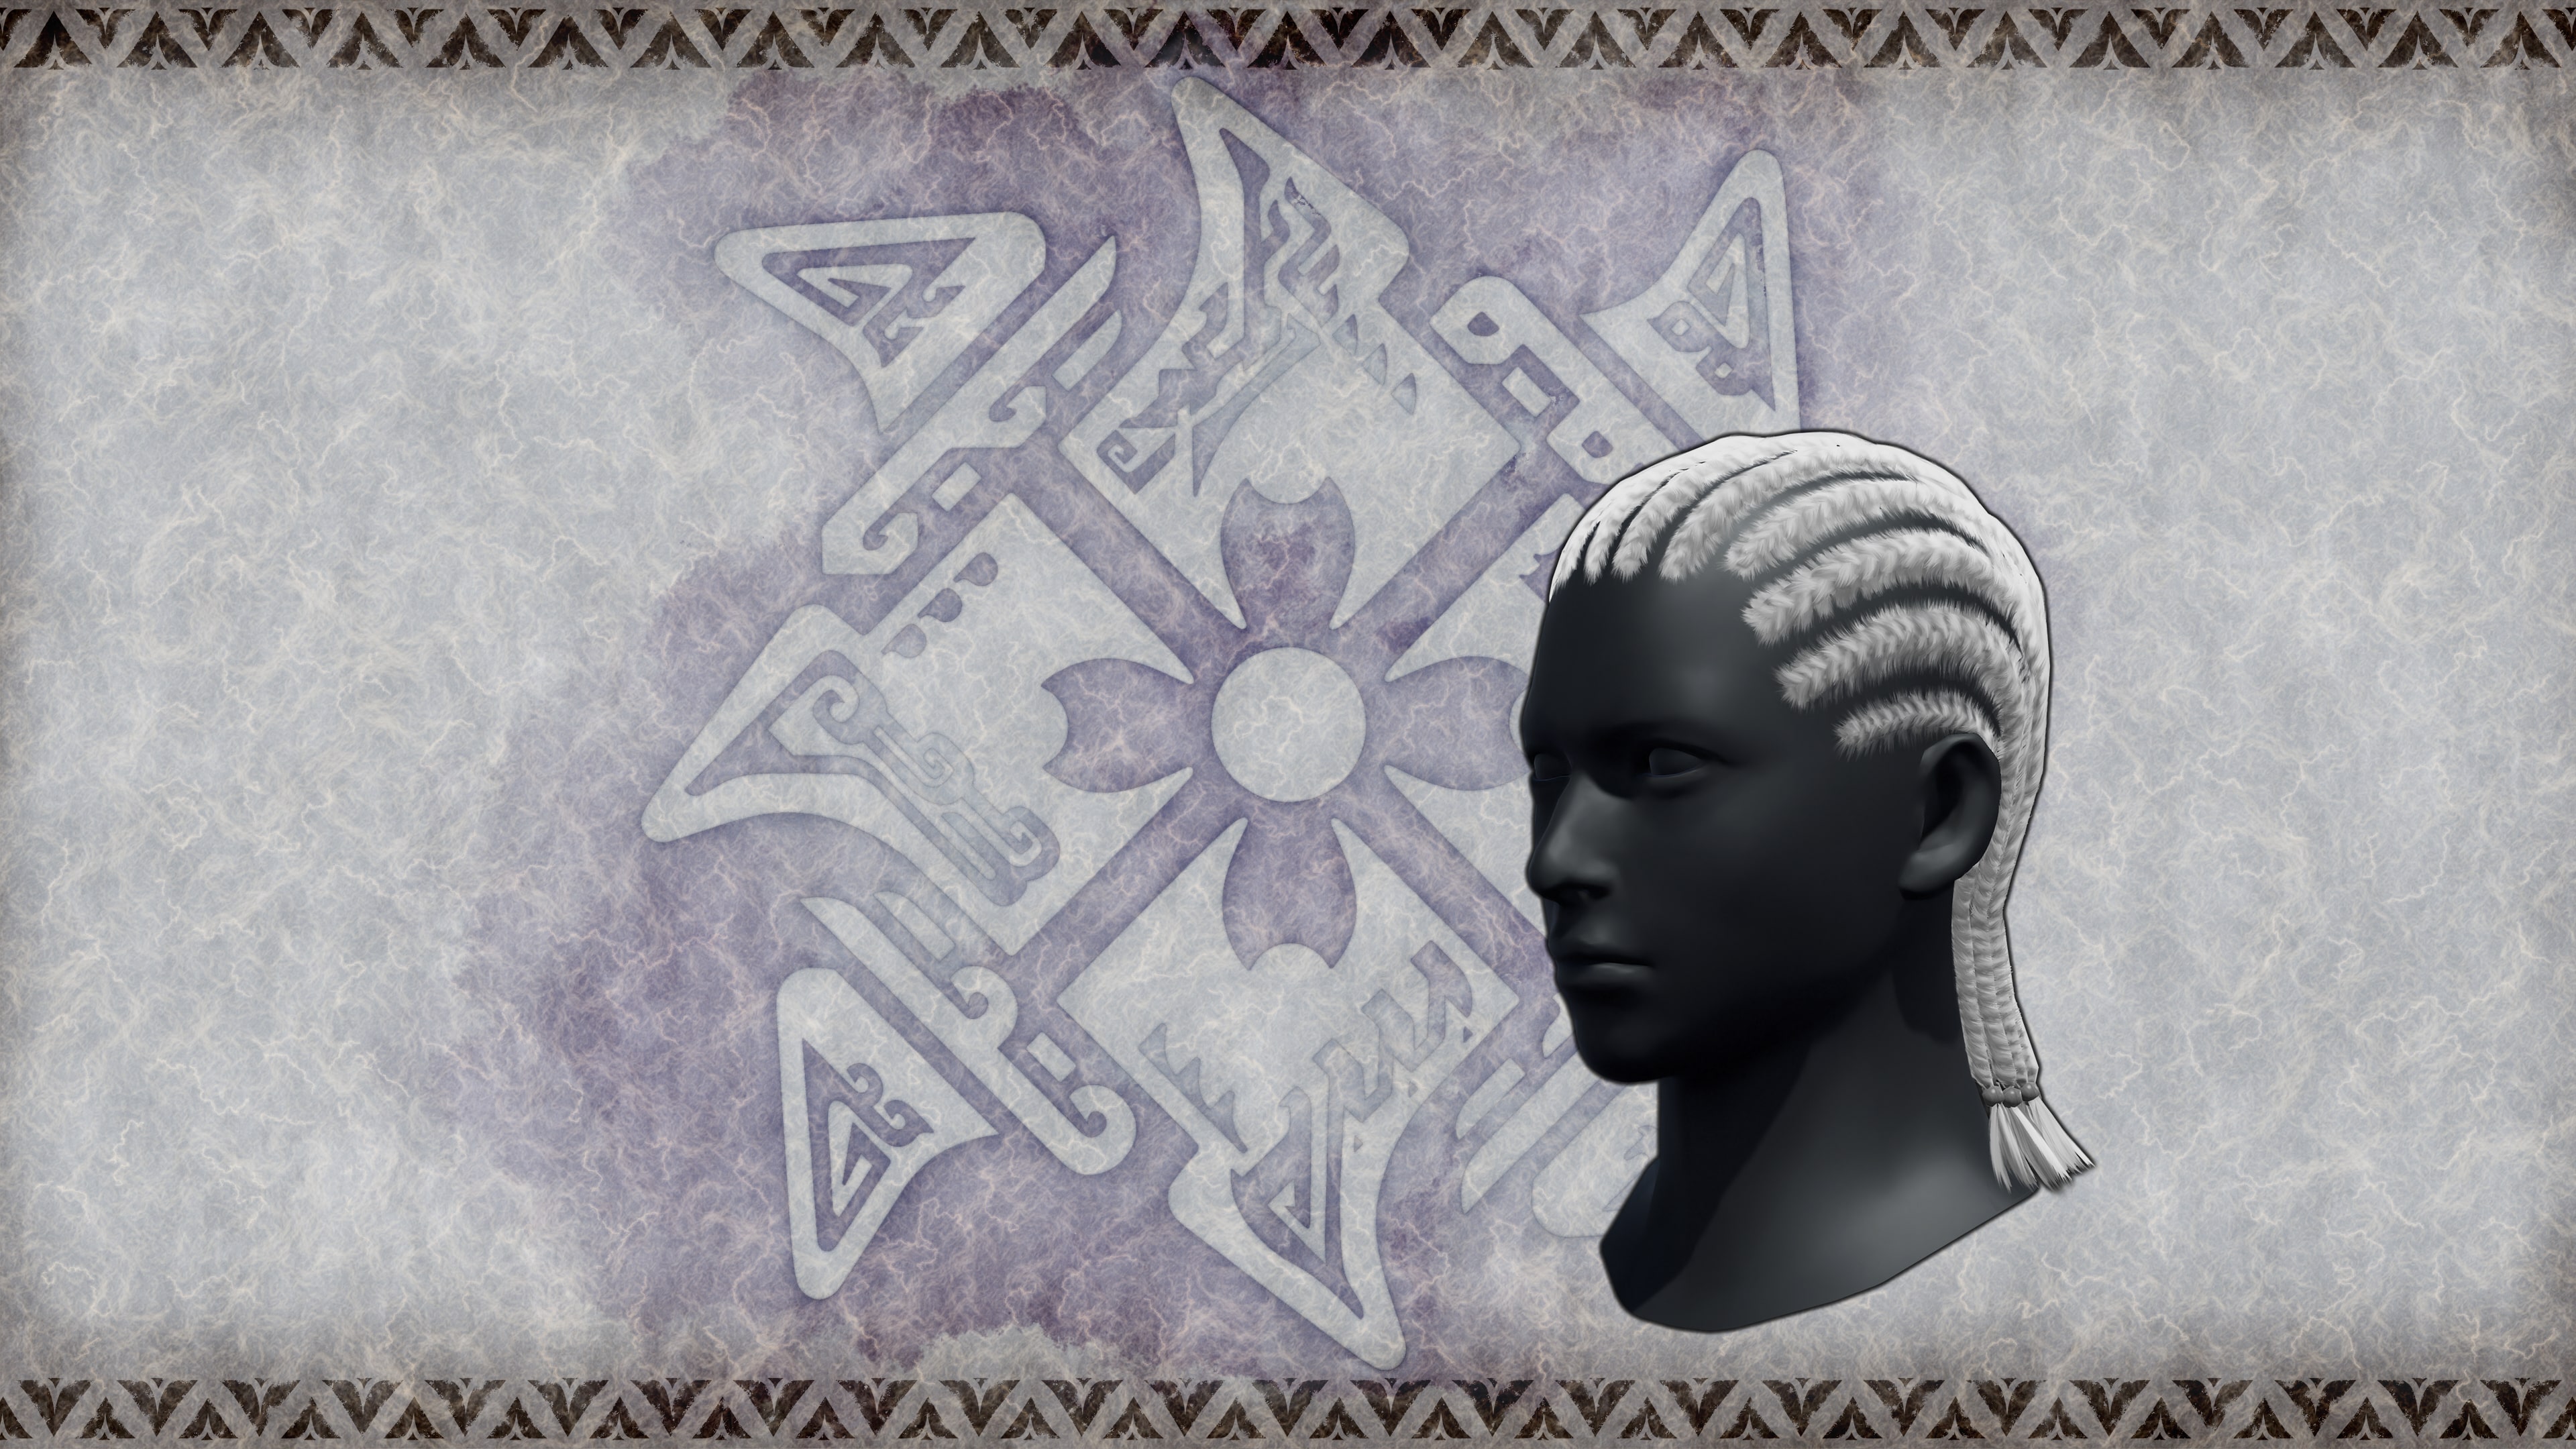 Monster Hunter Rise - "DLC 17" hairstyle